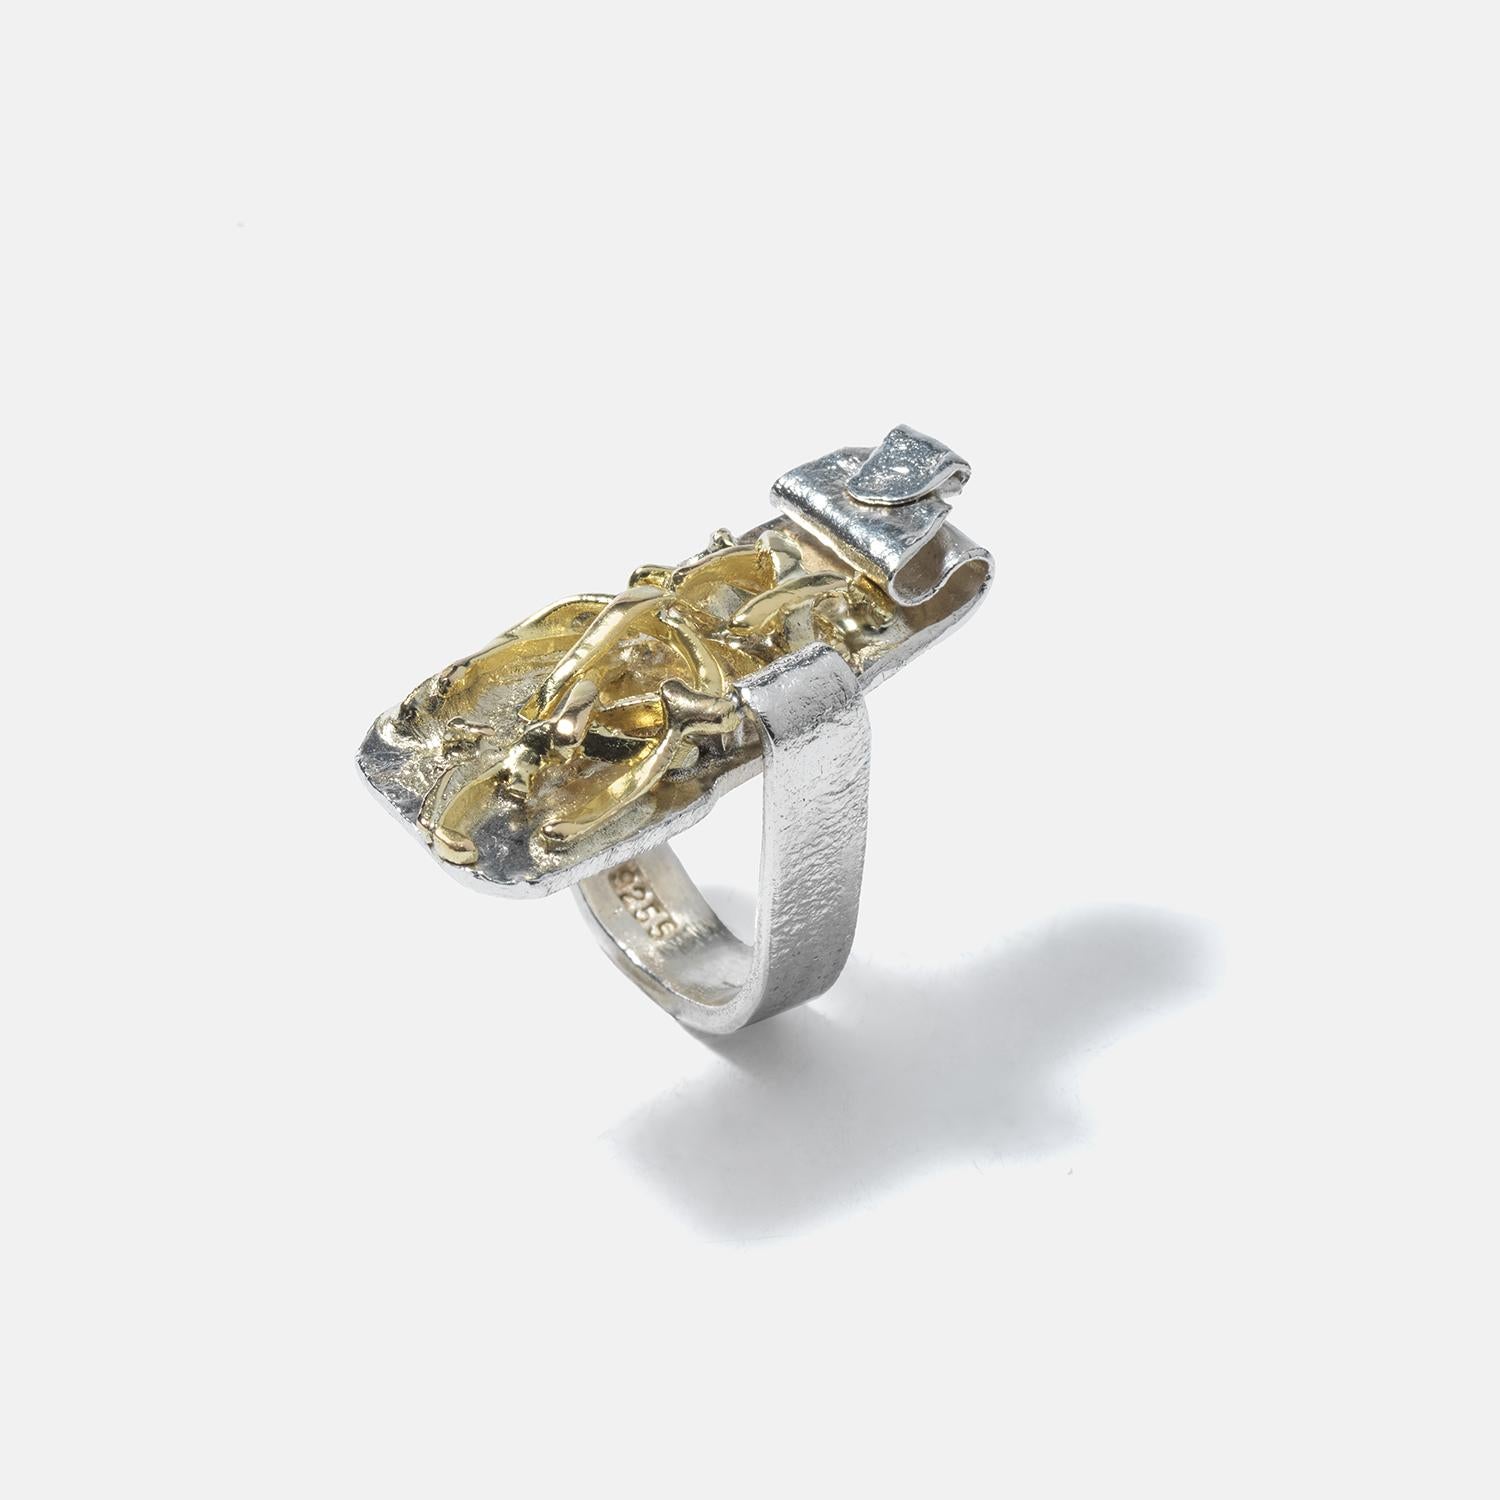 This ring is a unique piece of jewelry that combines both silver and gilded silver elements. It has a broad, unevenly textured band that narrows slightly at the back, giving it a rustic and handcrafted appearance. The top of the ring features an